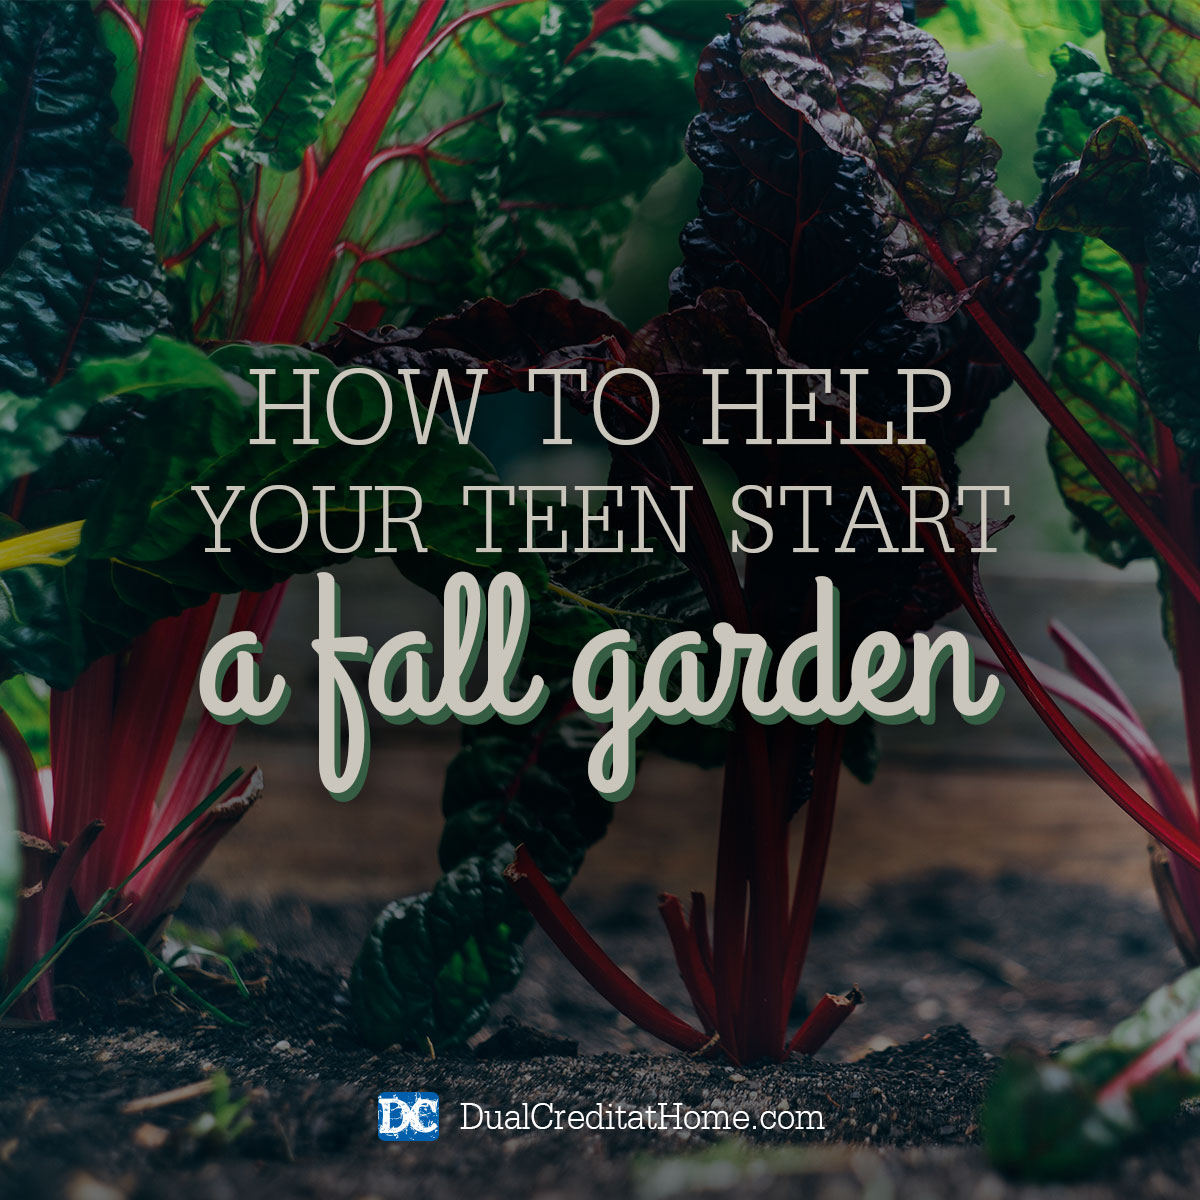 Gardening can teach teenagers about biology, botany, and nutrition.